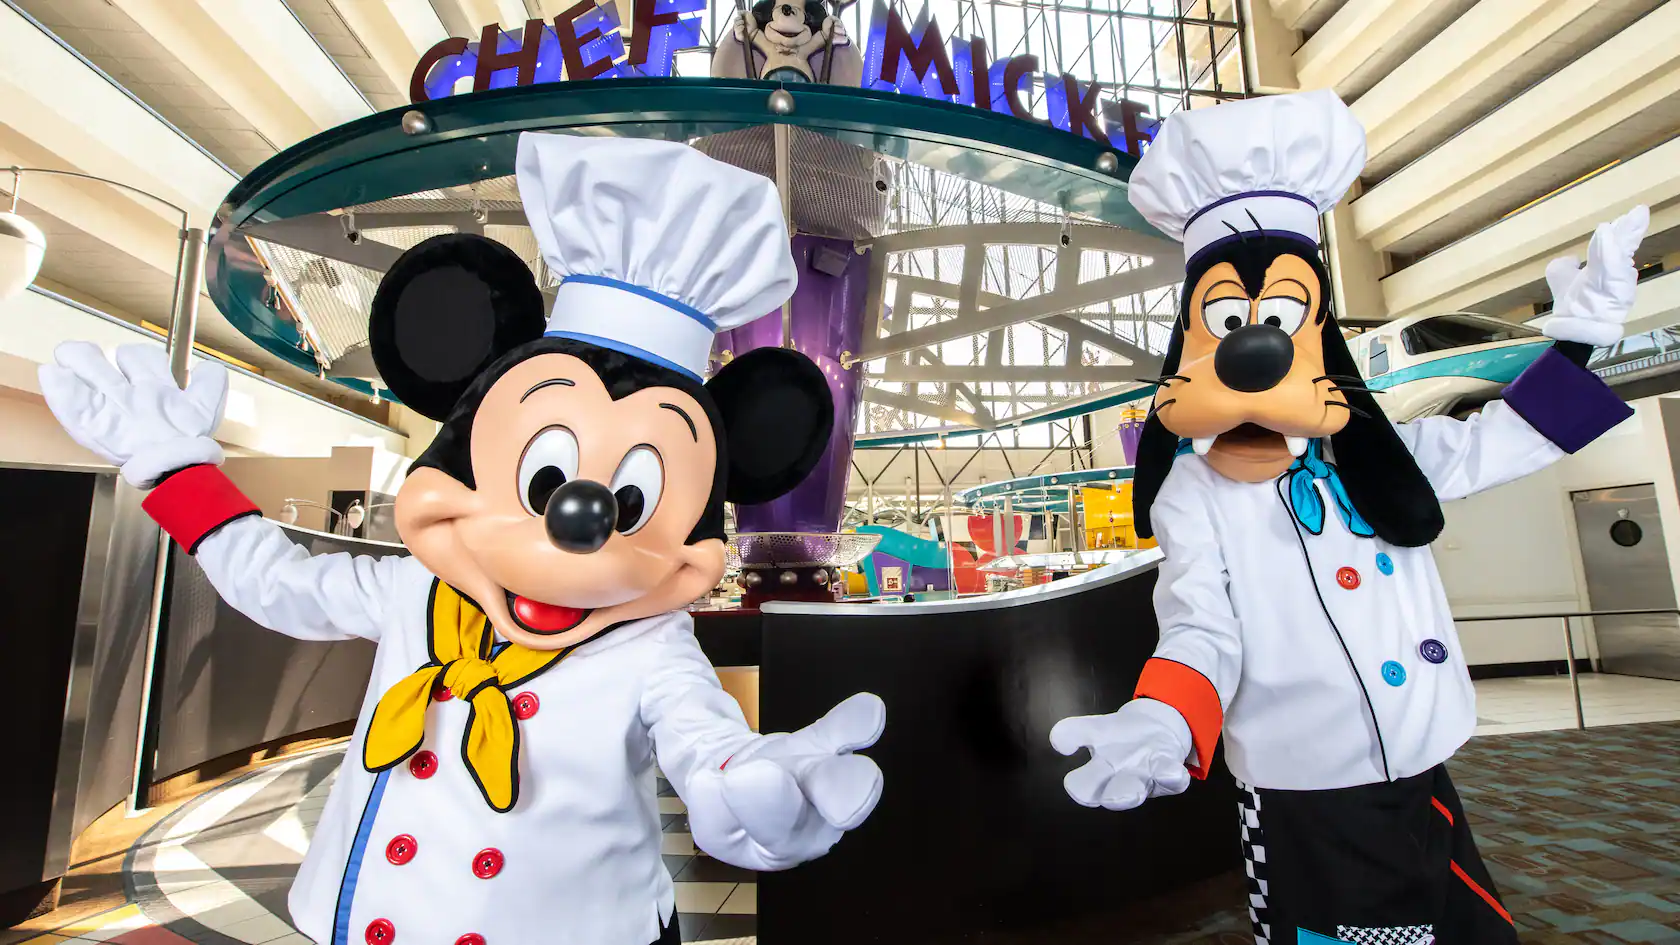 Mickey and Goofy standing in front of the restaurant Chef Mickey's